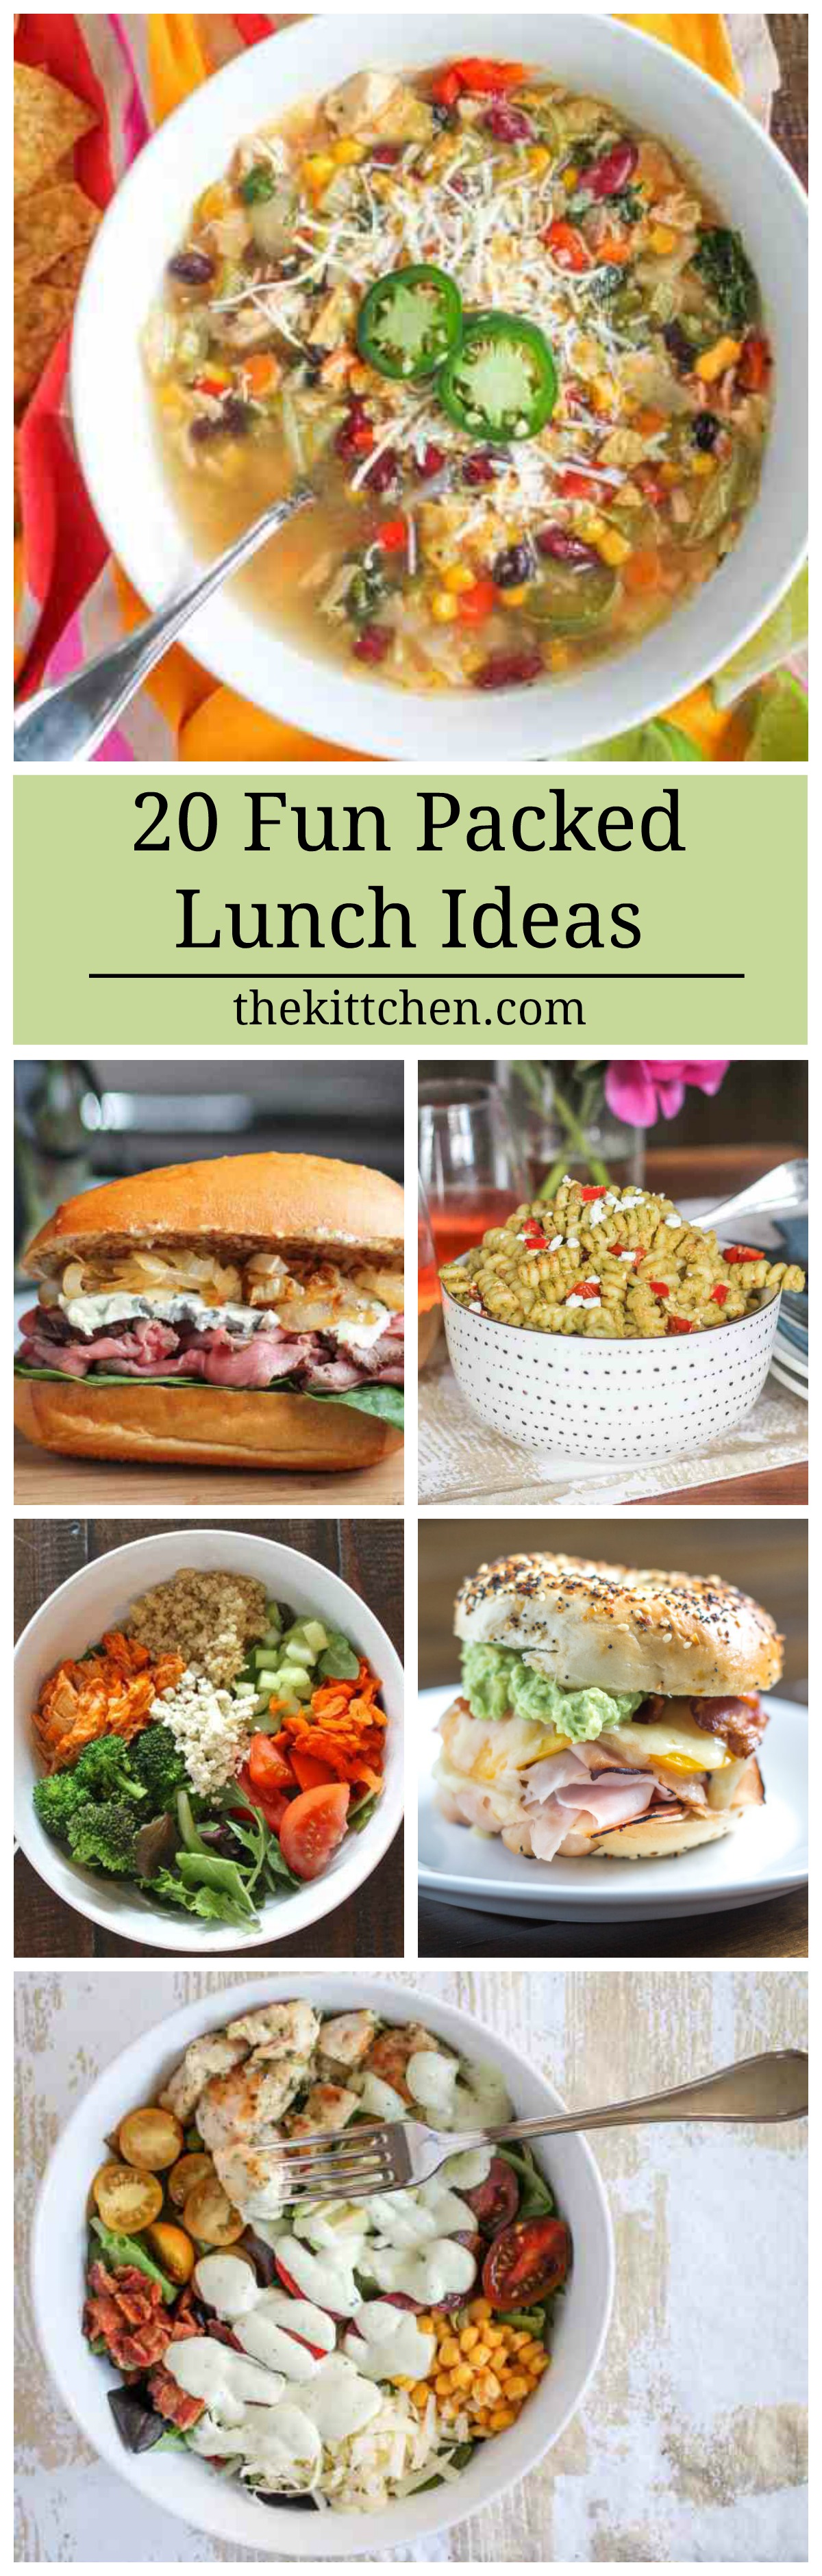 20 Fun Packed Lunch Ideas